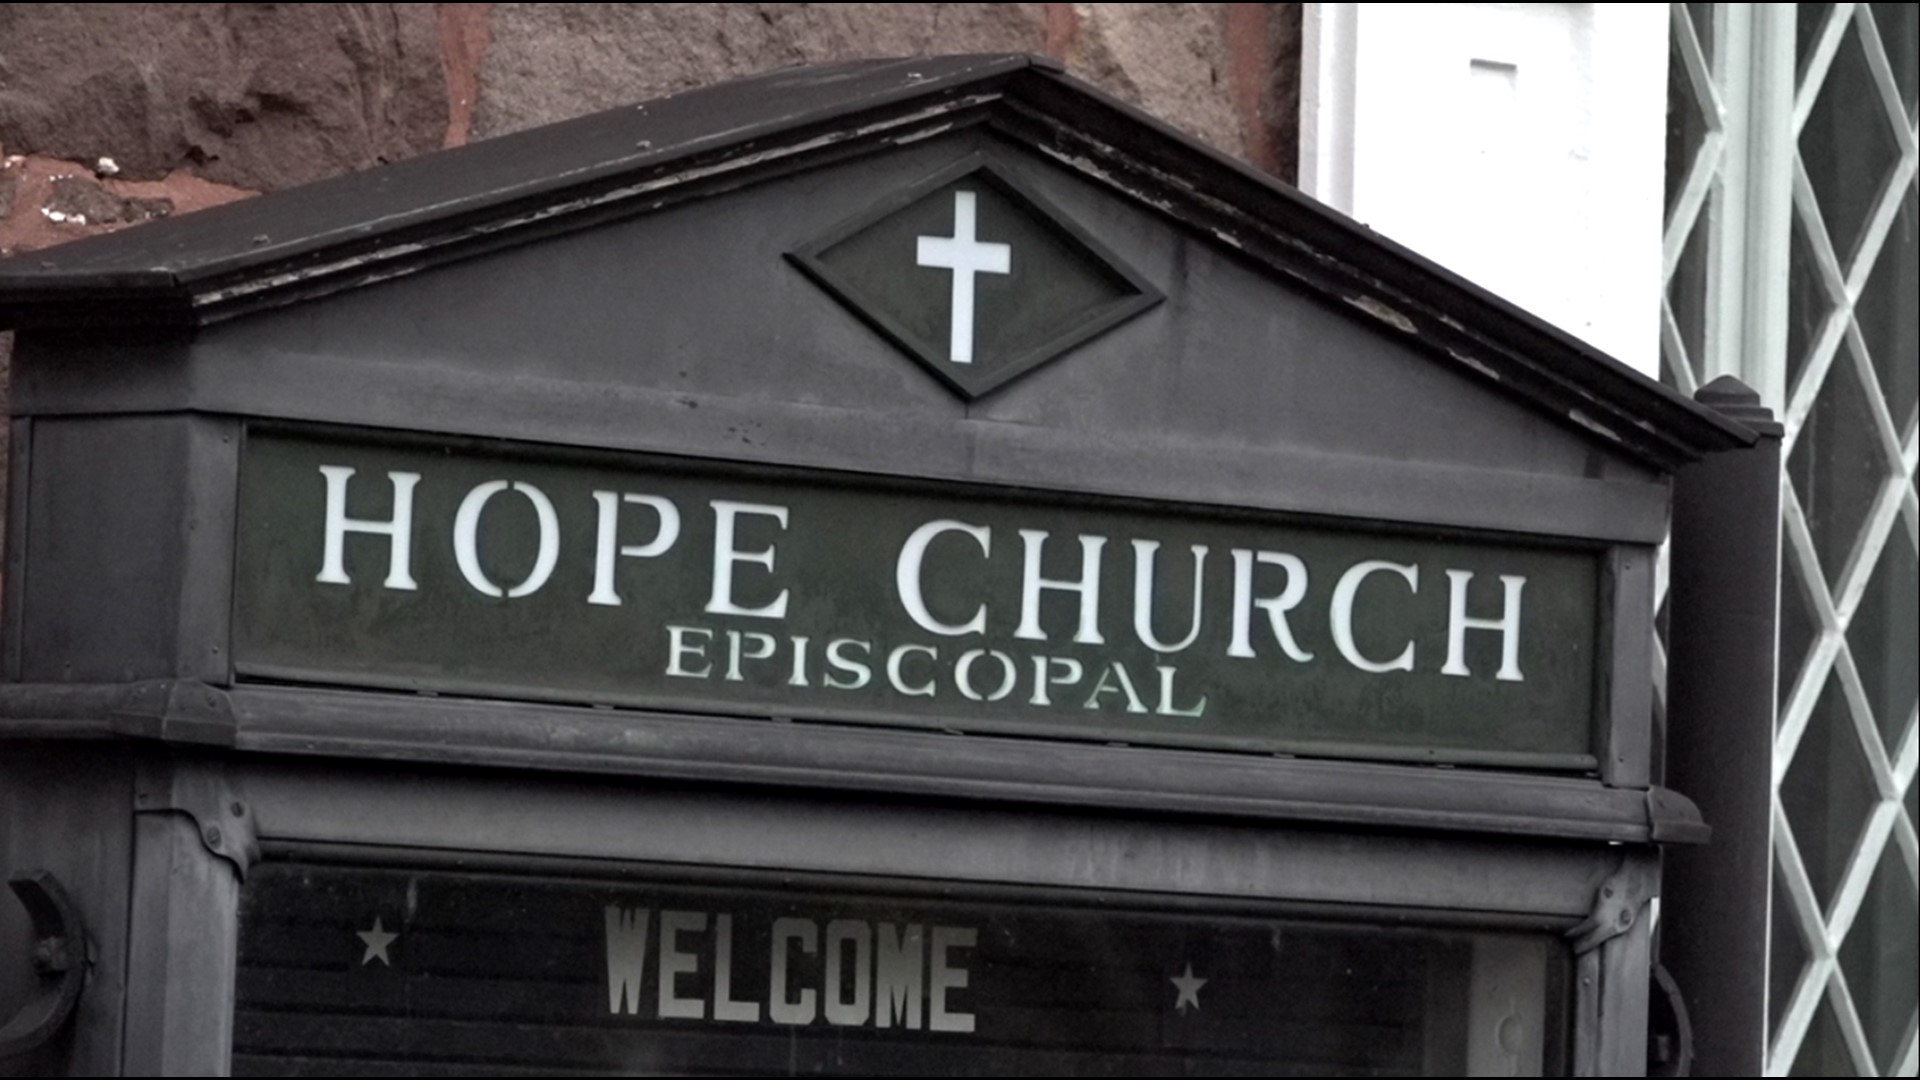 The effort has spread to more than 120 Episcopal churches statewide.